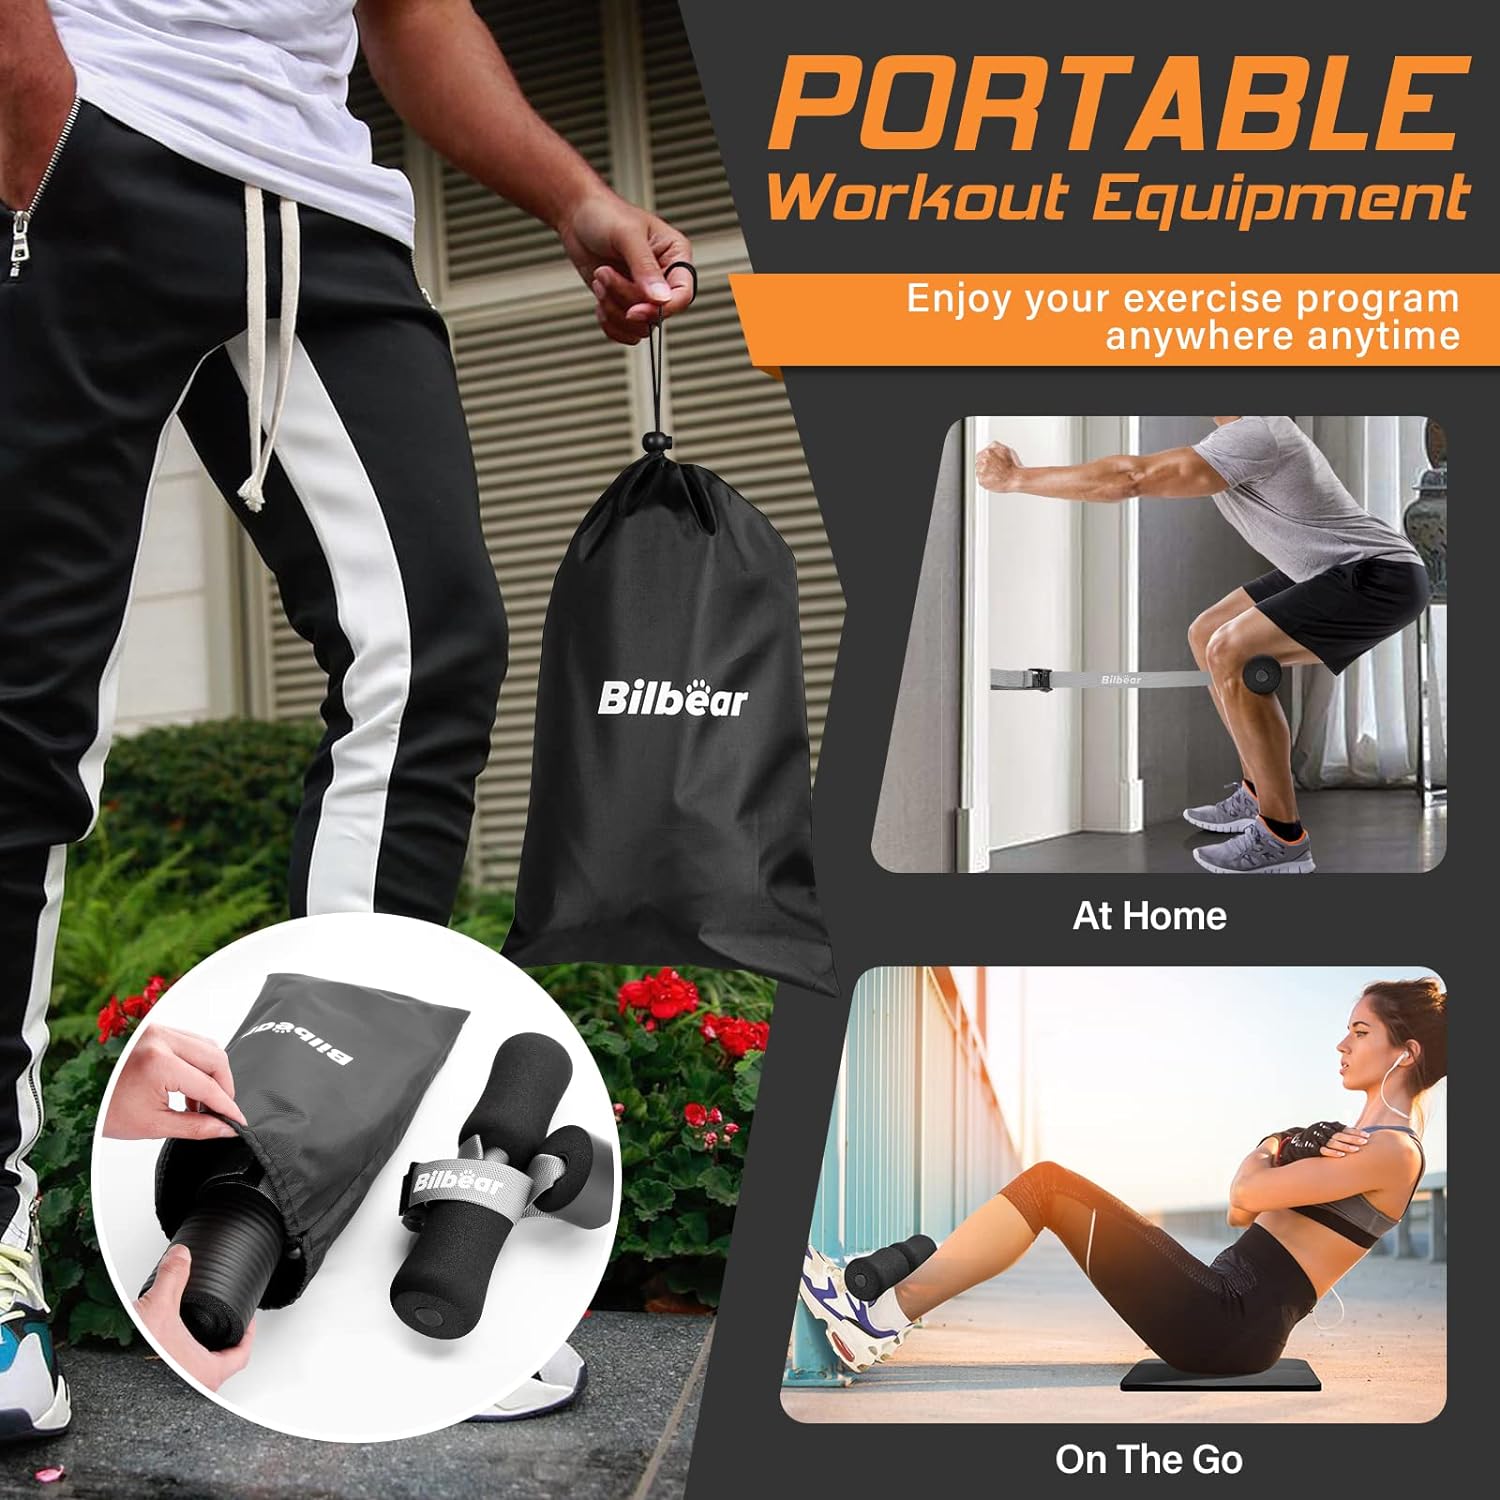 Experience Ultimate Leg Strength with the Adjustable Hamstring Curl Strap!